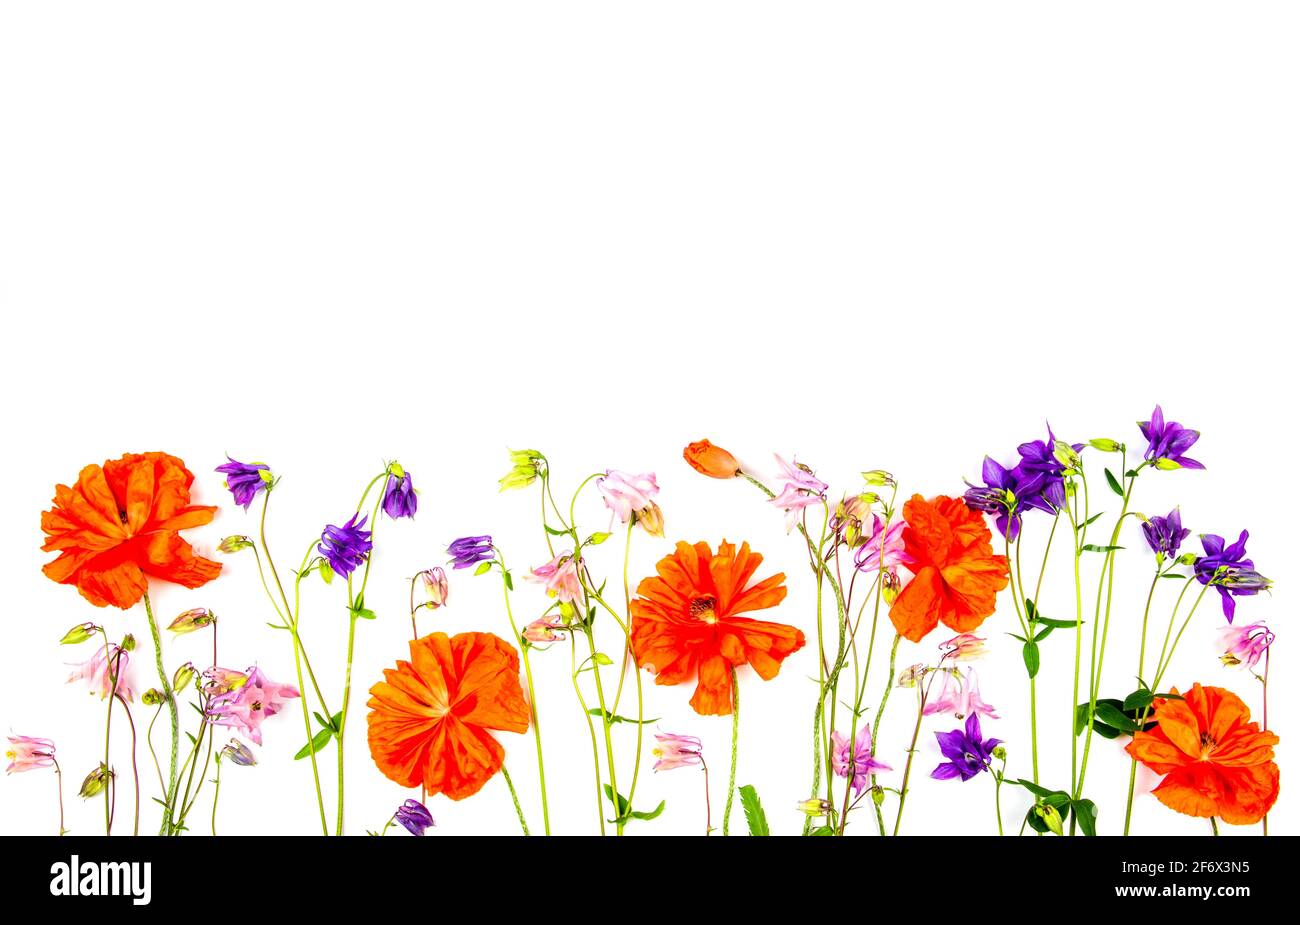 floral border of aquilegia flowers and red poppies isolated on a white background with a copy space Stock Photo